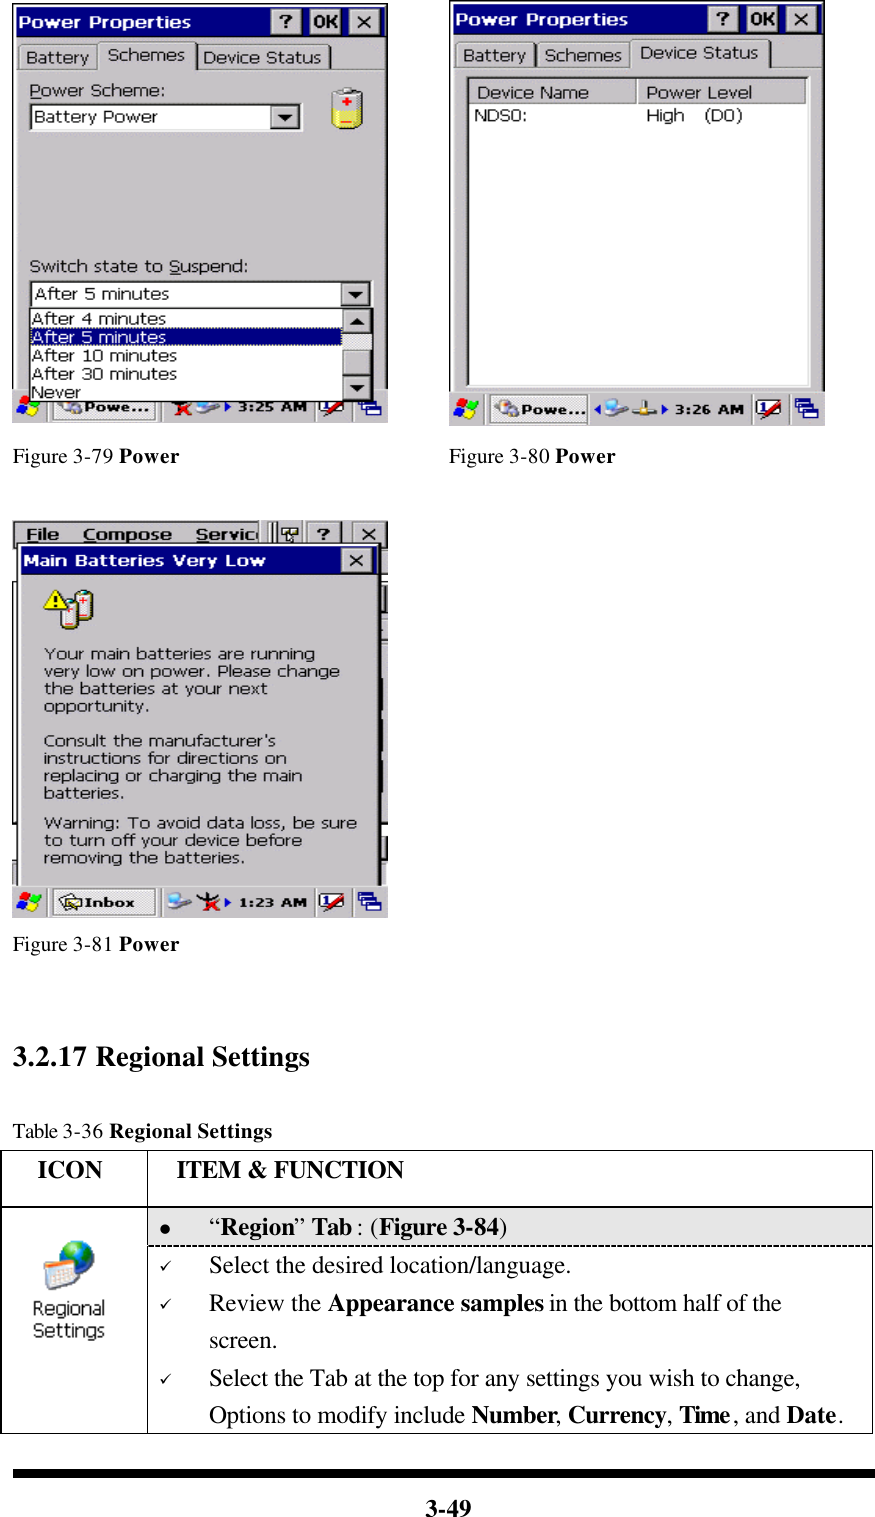  3-49   Figure 3-79 Power Figure 3-80 Power      Figure 3-81 Power     3.2.17 Regional Settings  Table 3-36 Regional Settings   ICON  ITEM &amp; FUNCTION l “Region” Tab : (Figure 3-84)  ü Select the desired location/language. ü Review the Appearance samples in the bottom half of the screen. ü Select the Tab at the top for any settings you wish to change, Options to modify include Number, Currency, Time, and Date. 